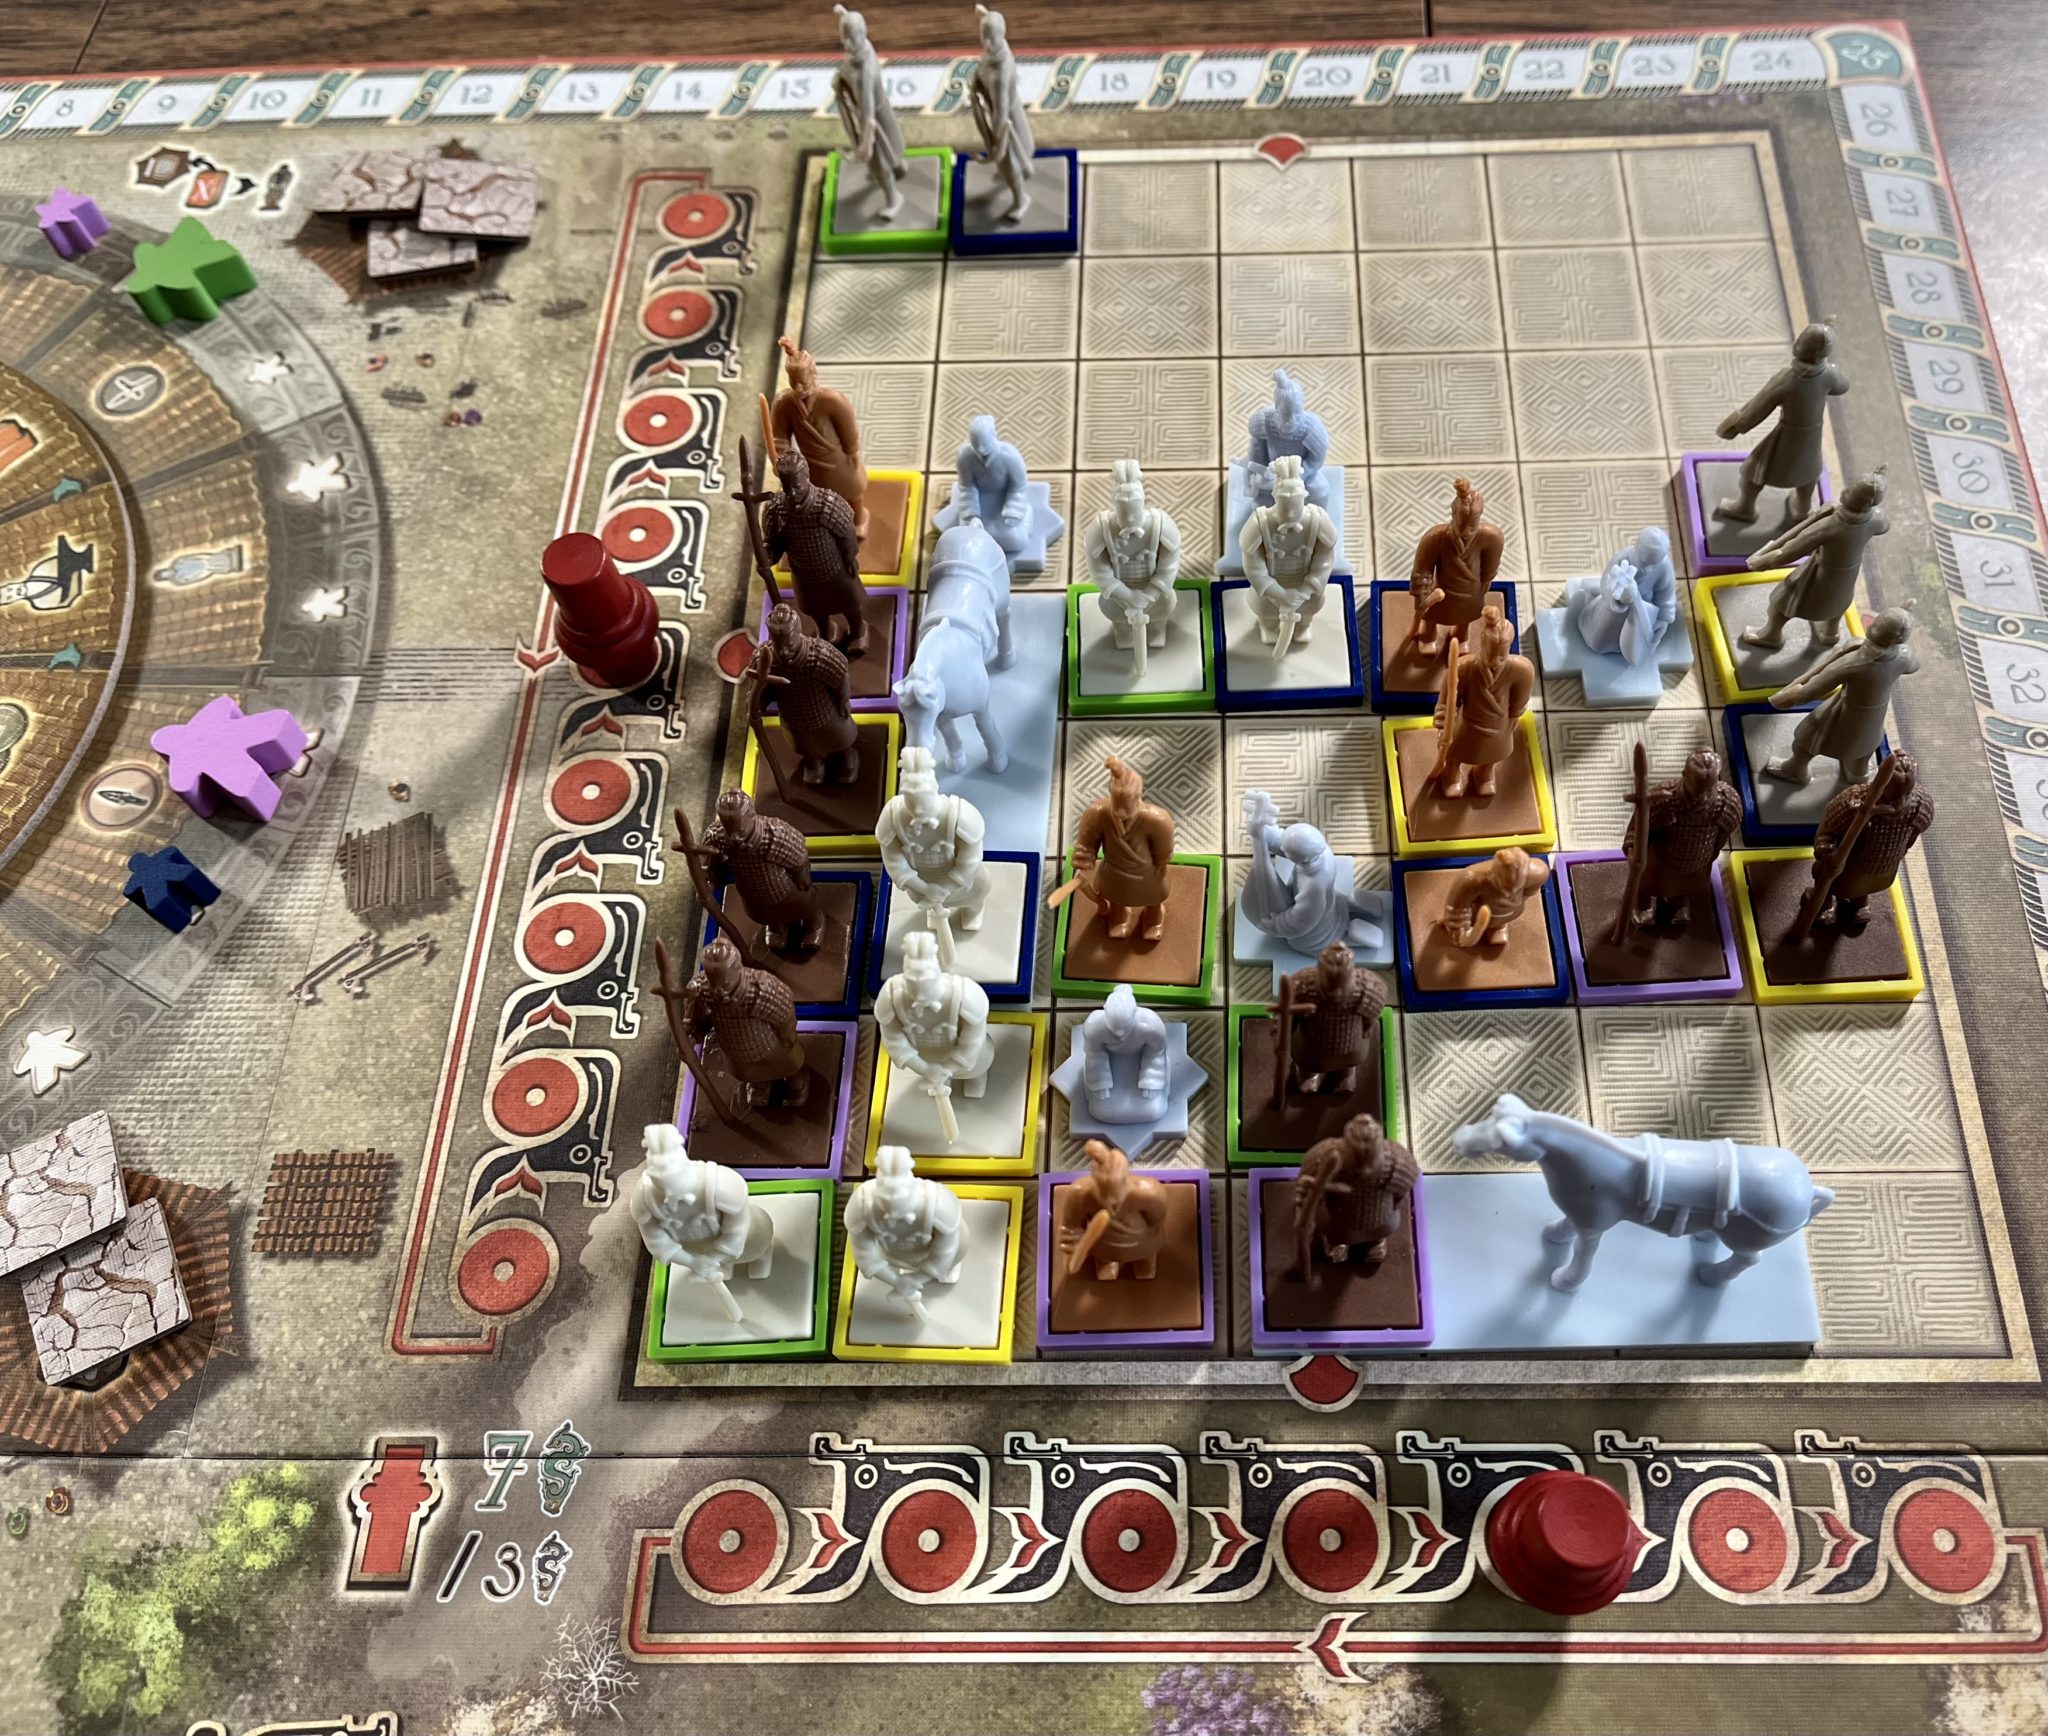 Terracotta Army on the board